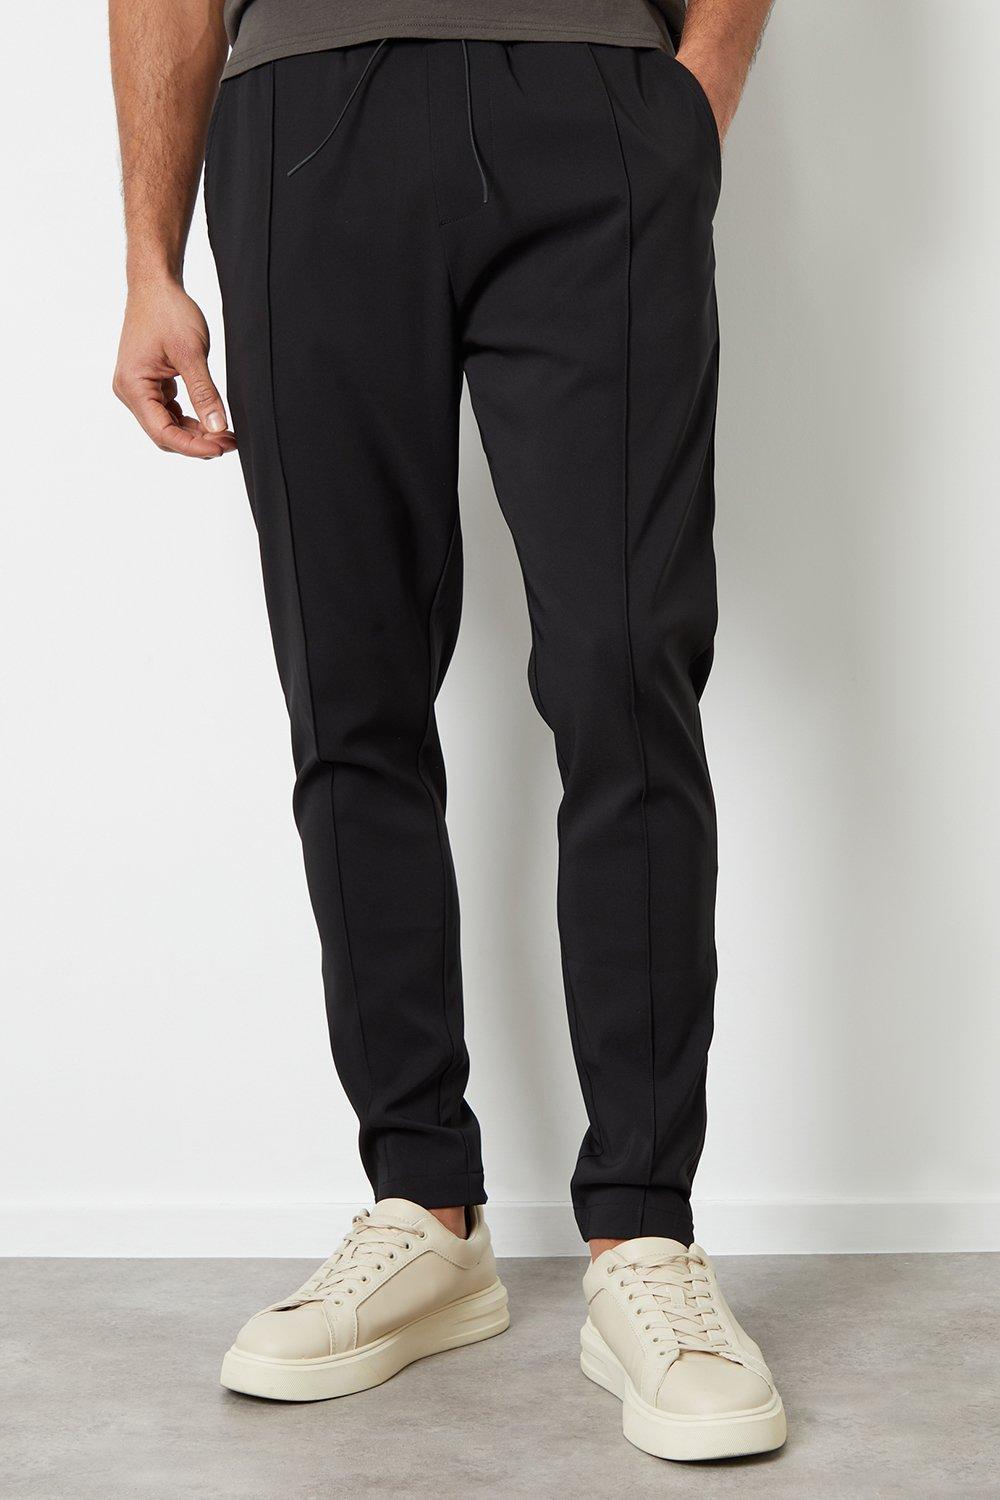 'Swinton' Luxe Pull-On Seam Detail Stretch Trousers